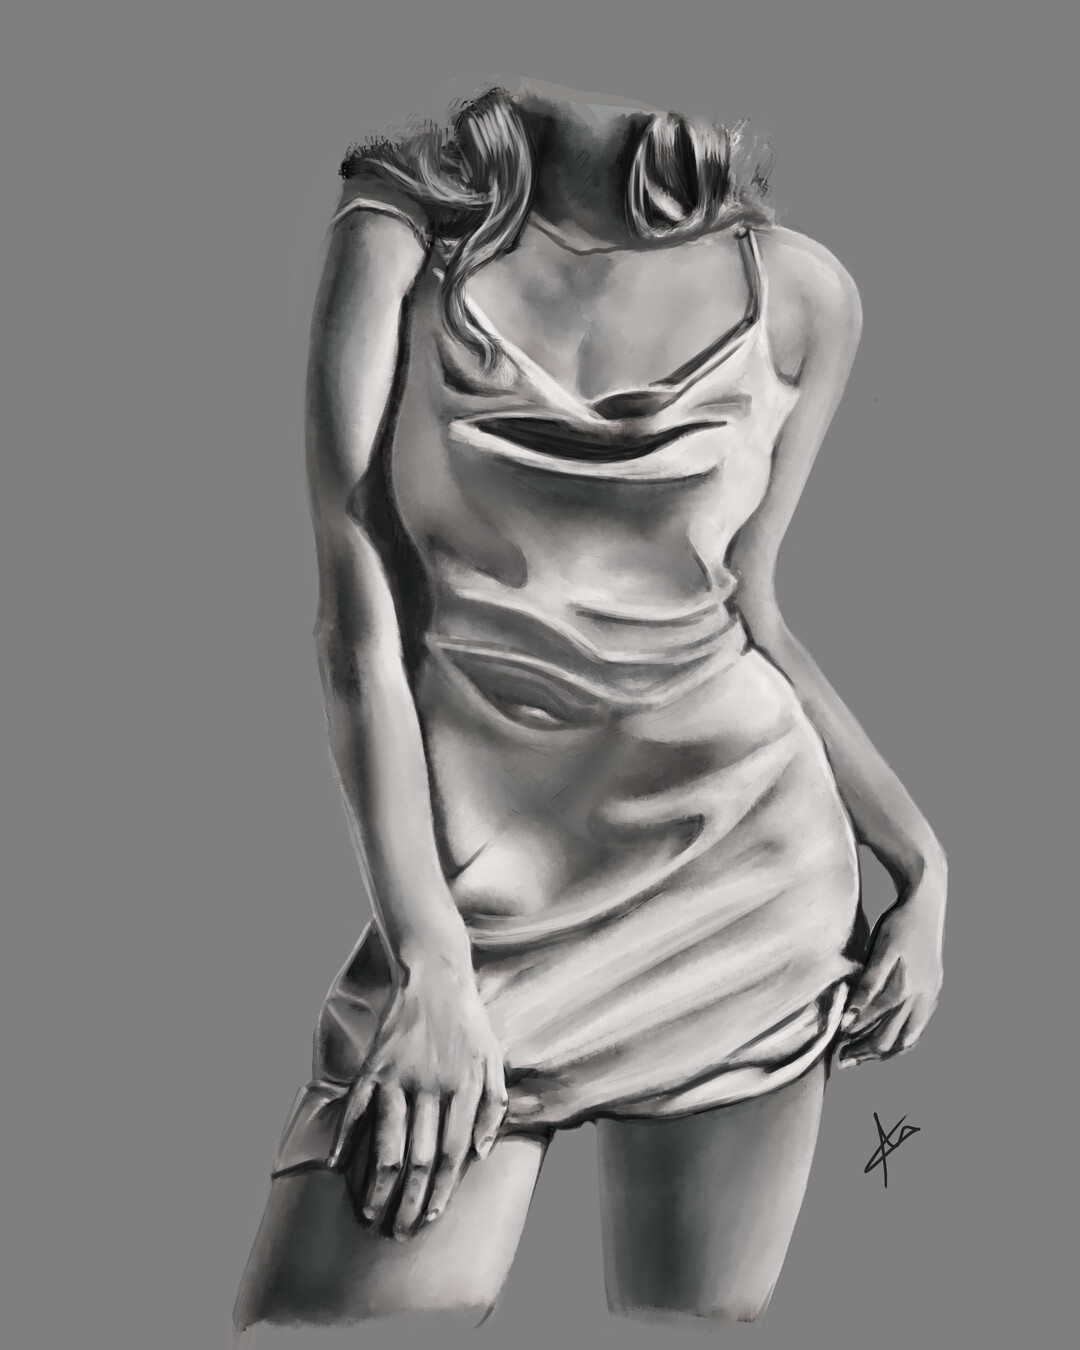 fabric and value study 